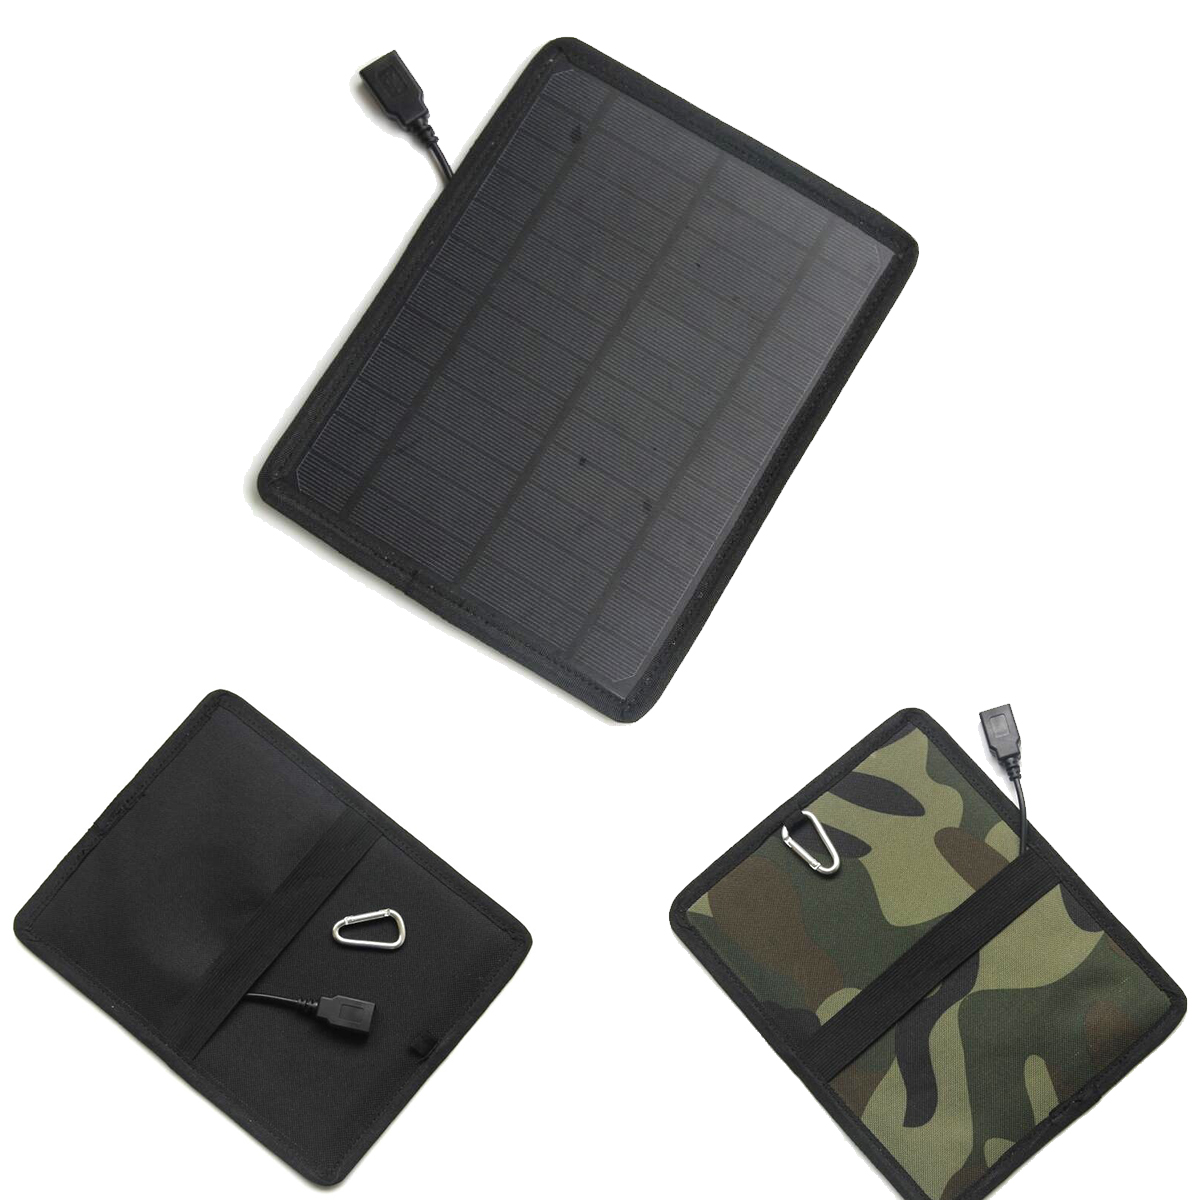 

Black/Camouflage 5.3W Mini Monocrystalline Silicon Solar Panel Charging Board Pack for Outdoor Equipment